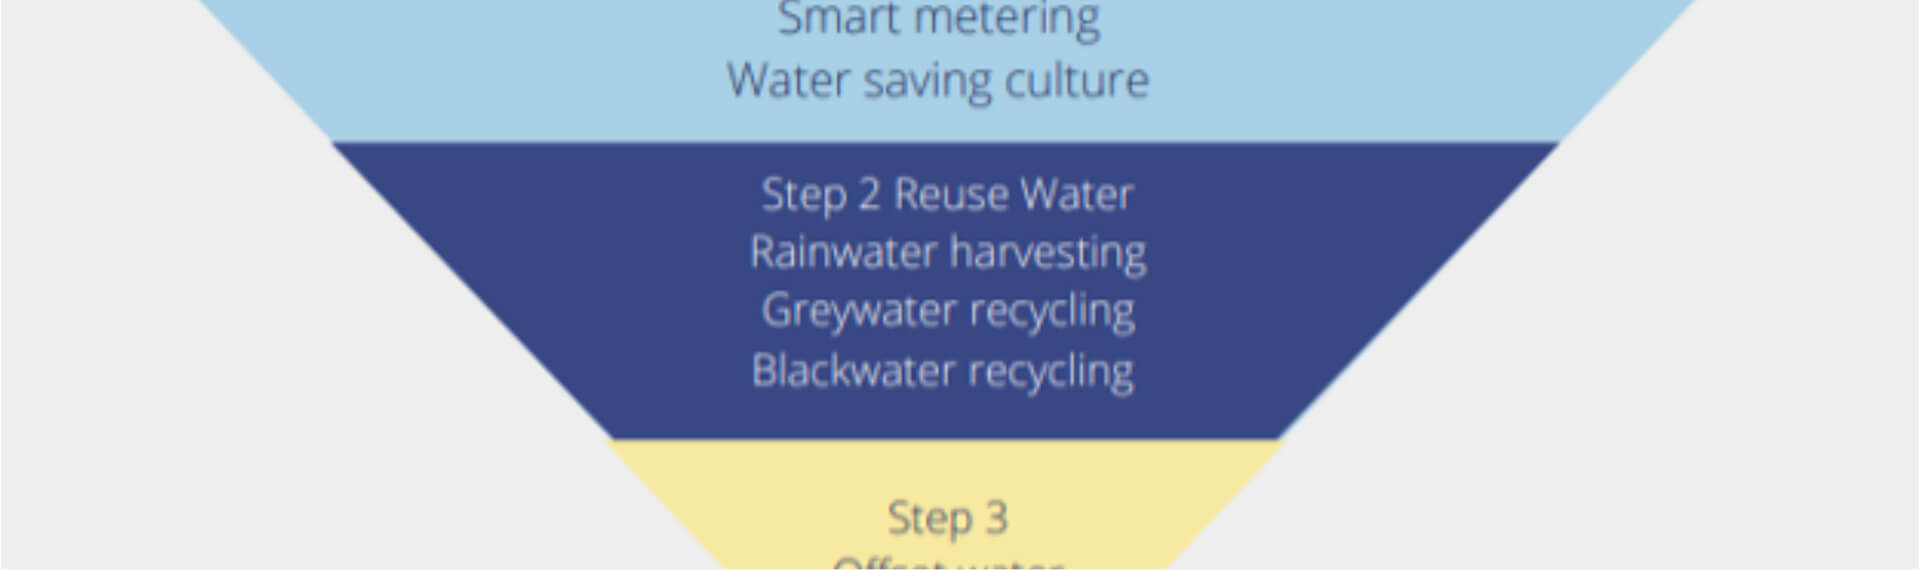 3 steps to water neutrality